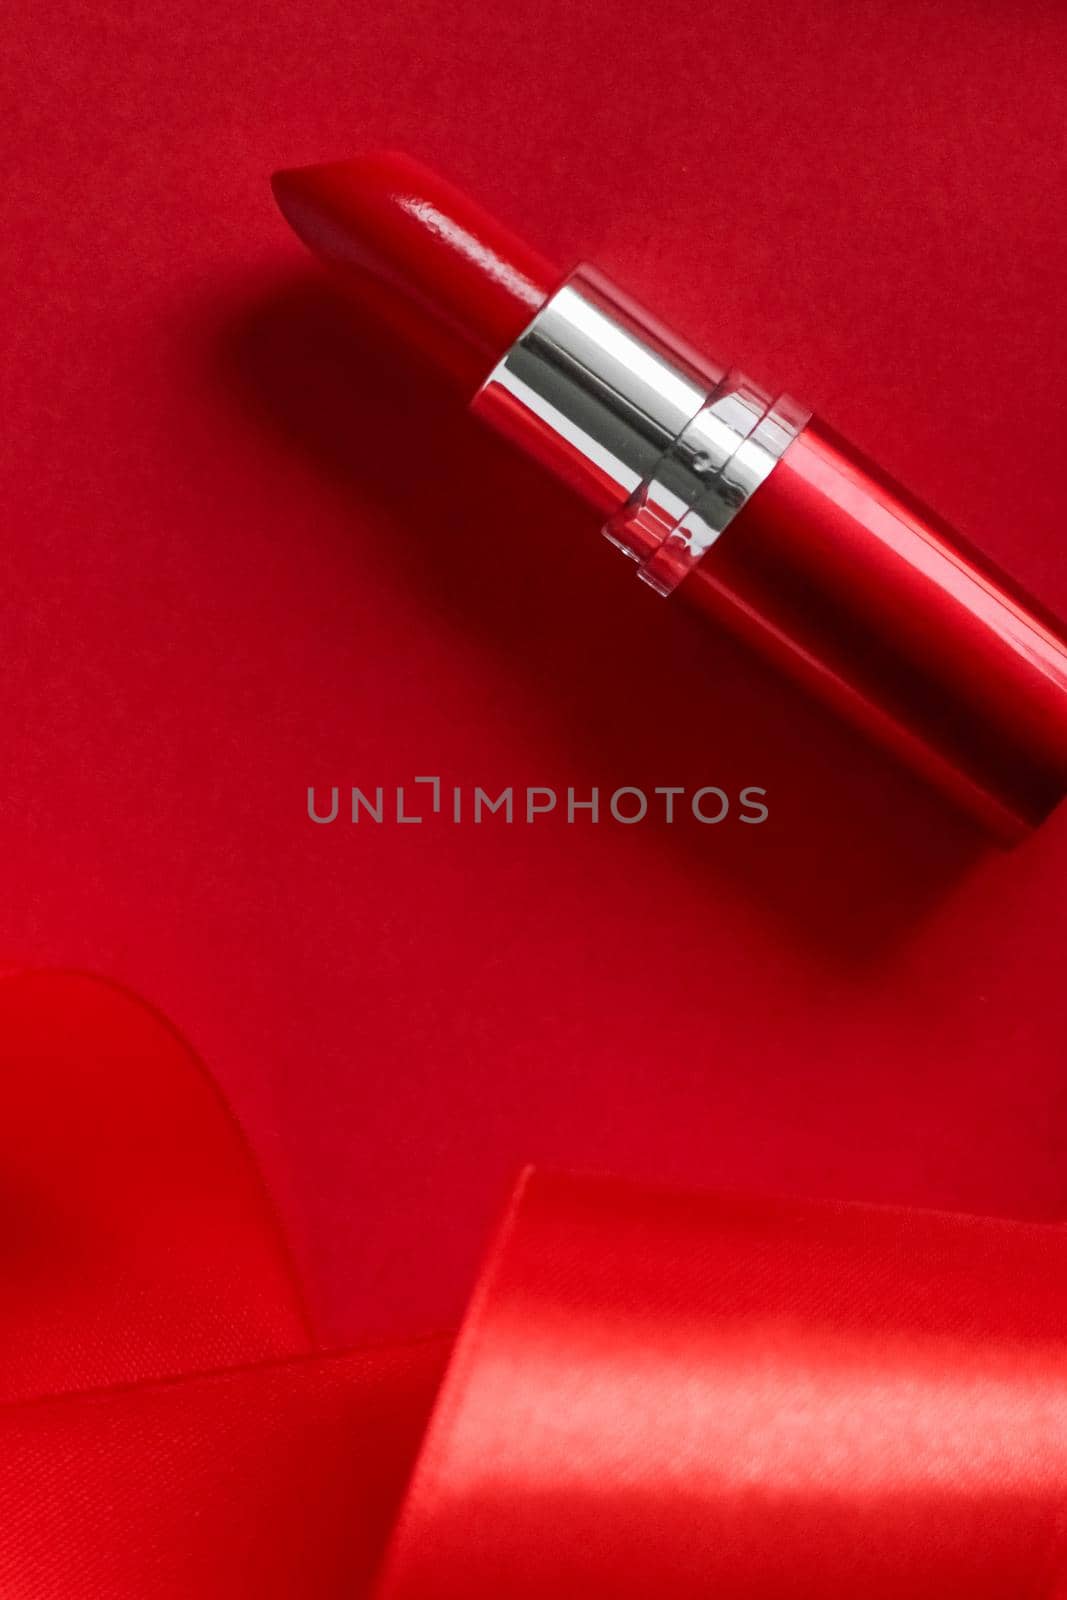 Cosmetic branding, glamour lip gloss and shopping sale concept - Luxury lipstick and silk ribbon on red holiday background, make-up and cosmetics flatlay for beauty brand product design